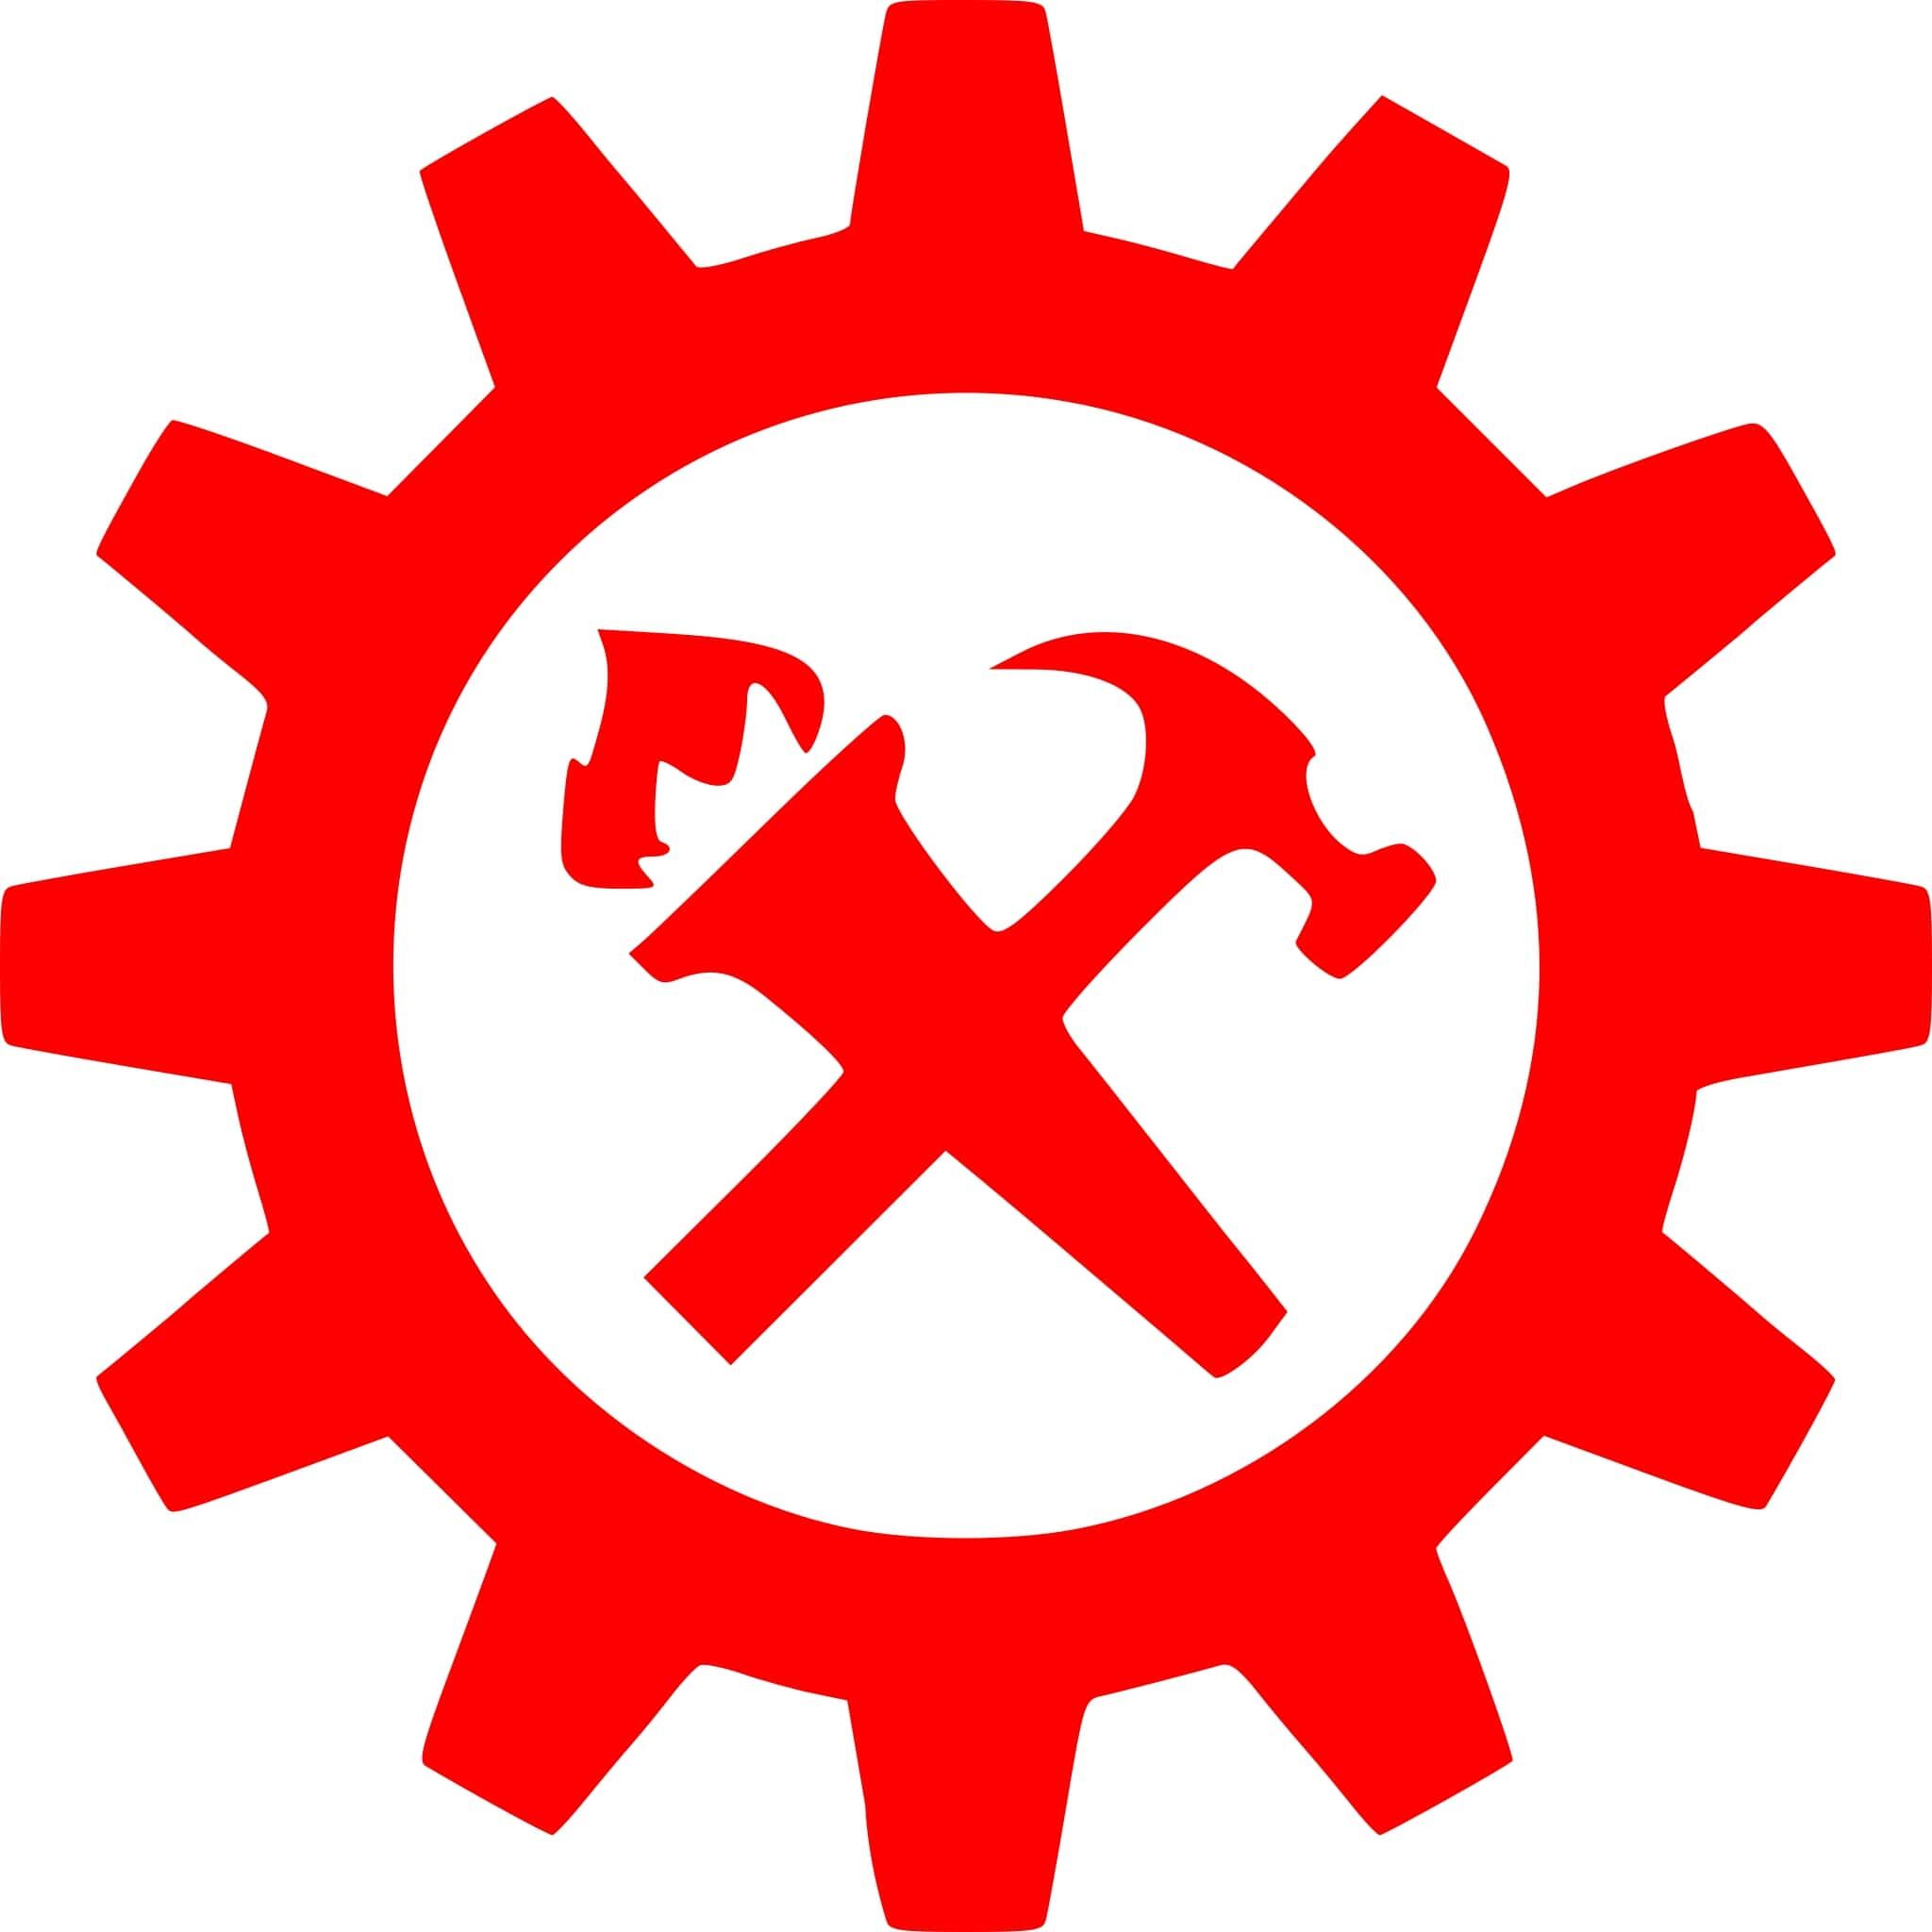 Revolutionary Workers Party (Chile) - Wikipedia